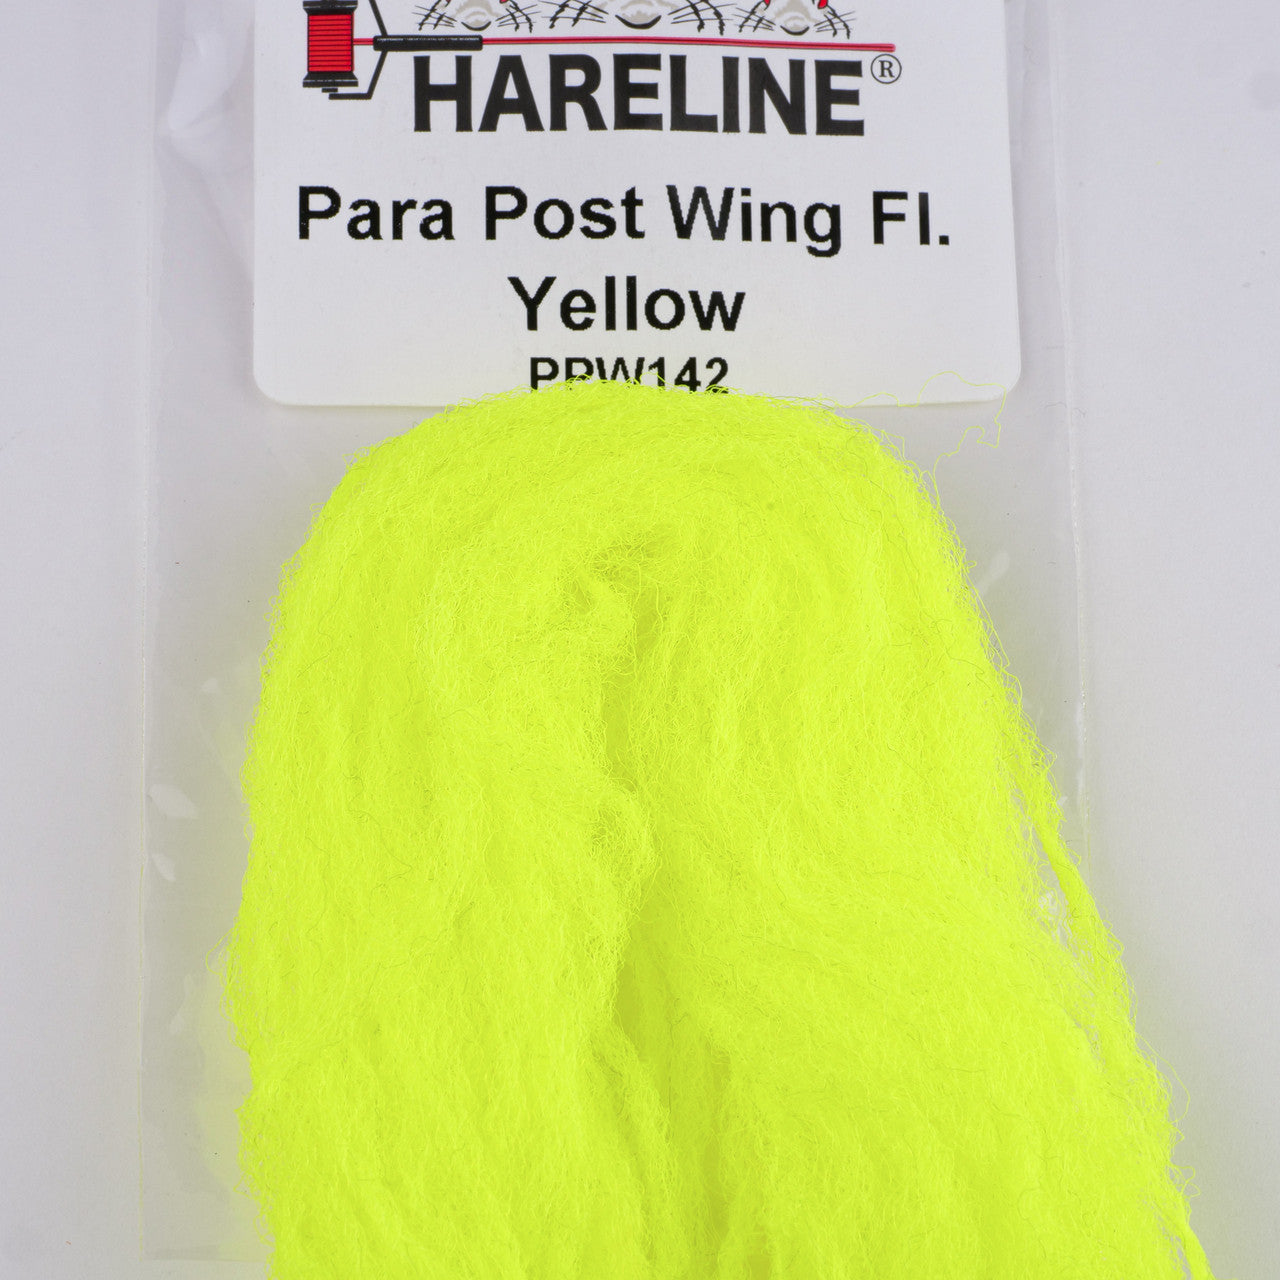 Hareline Para Post Wing and Indicator Material